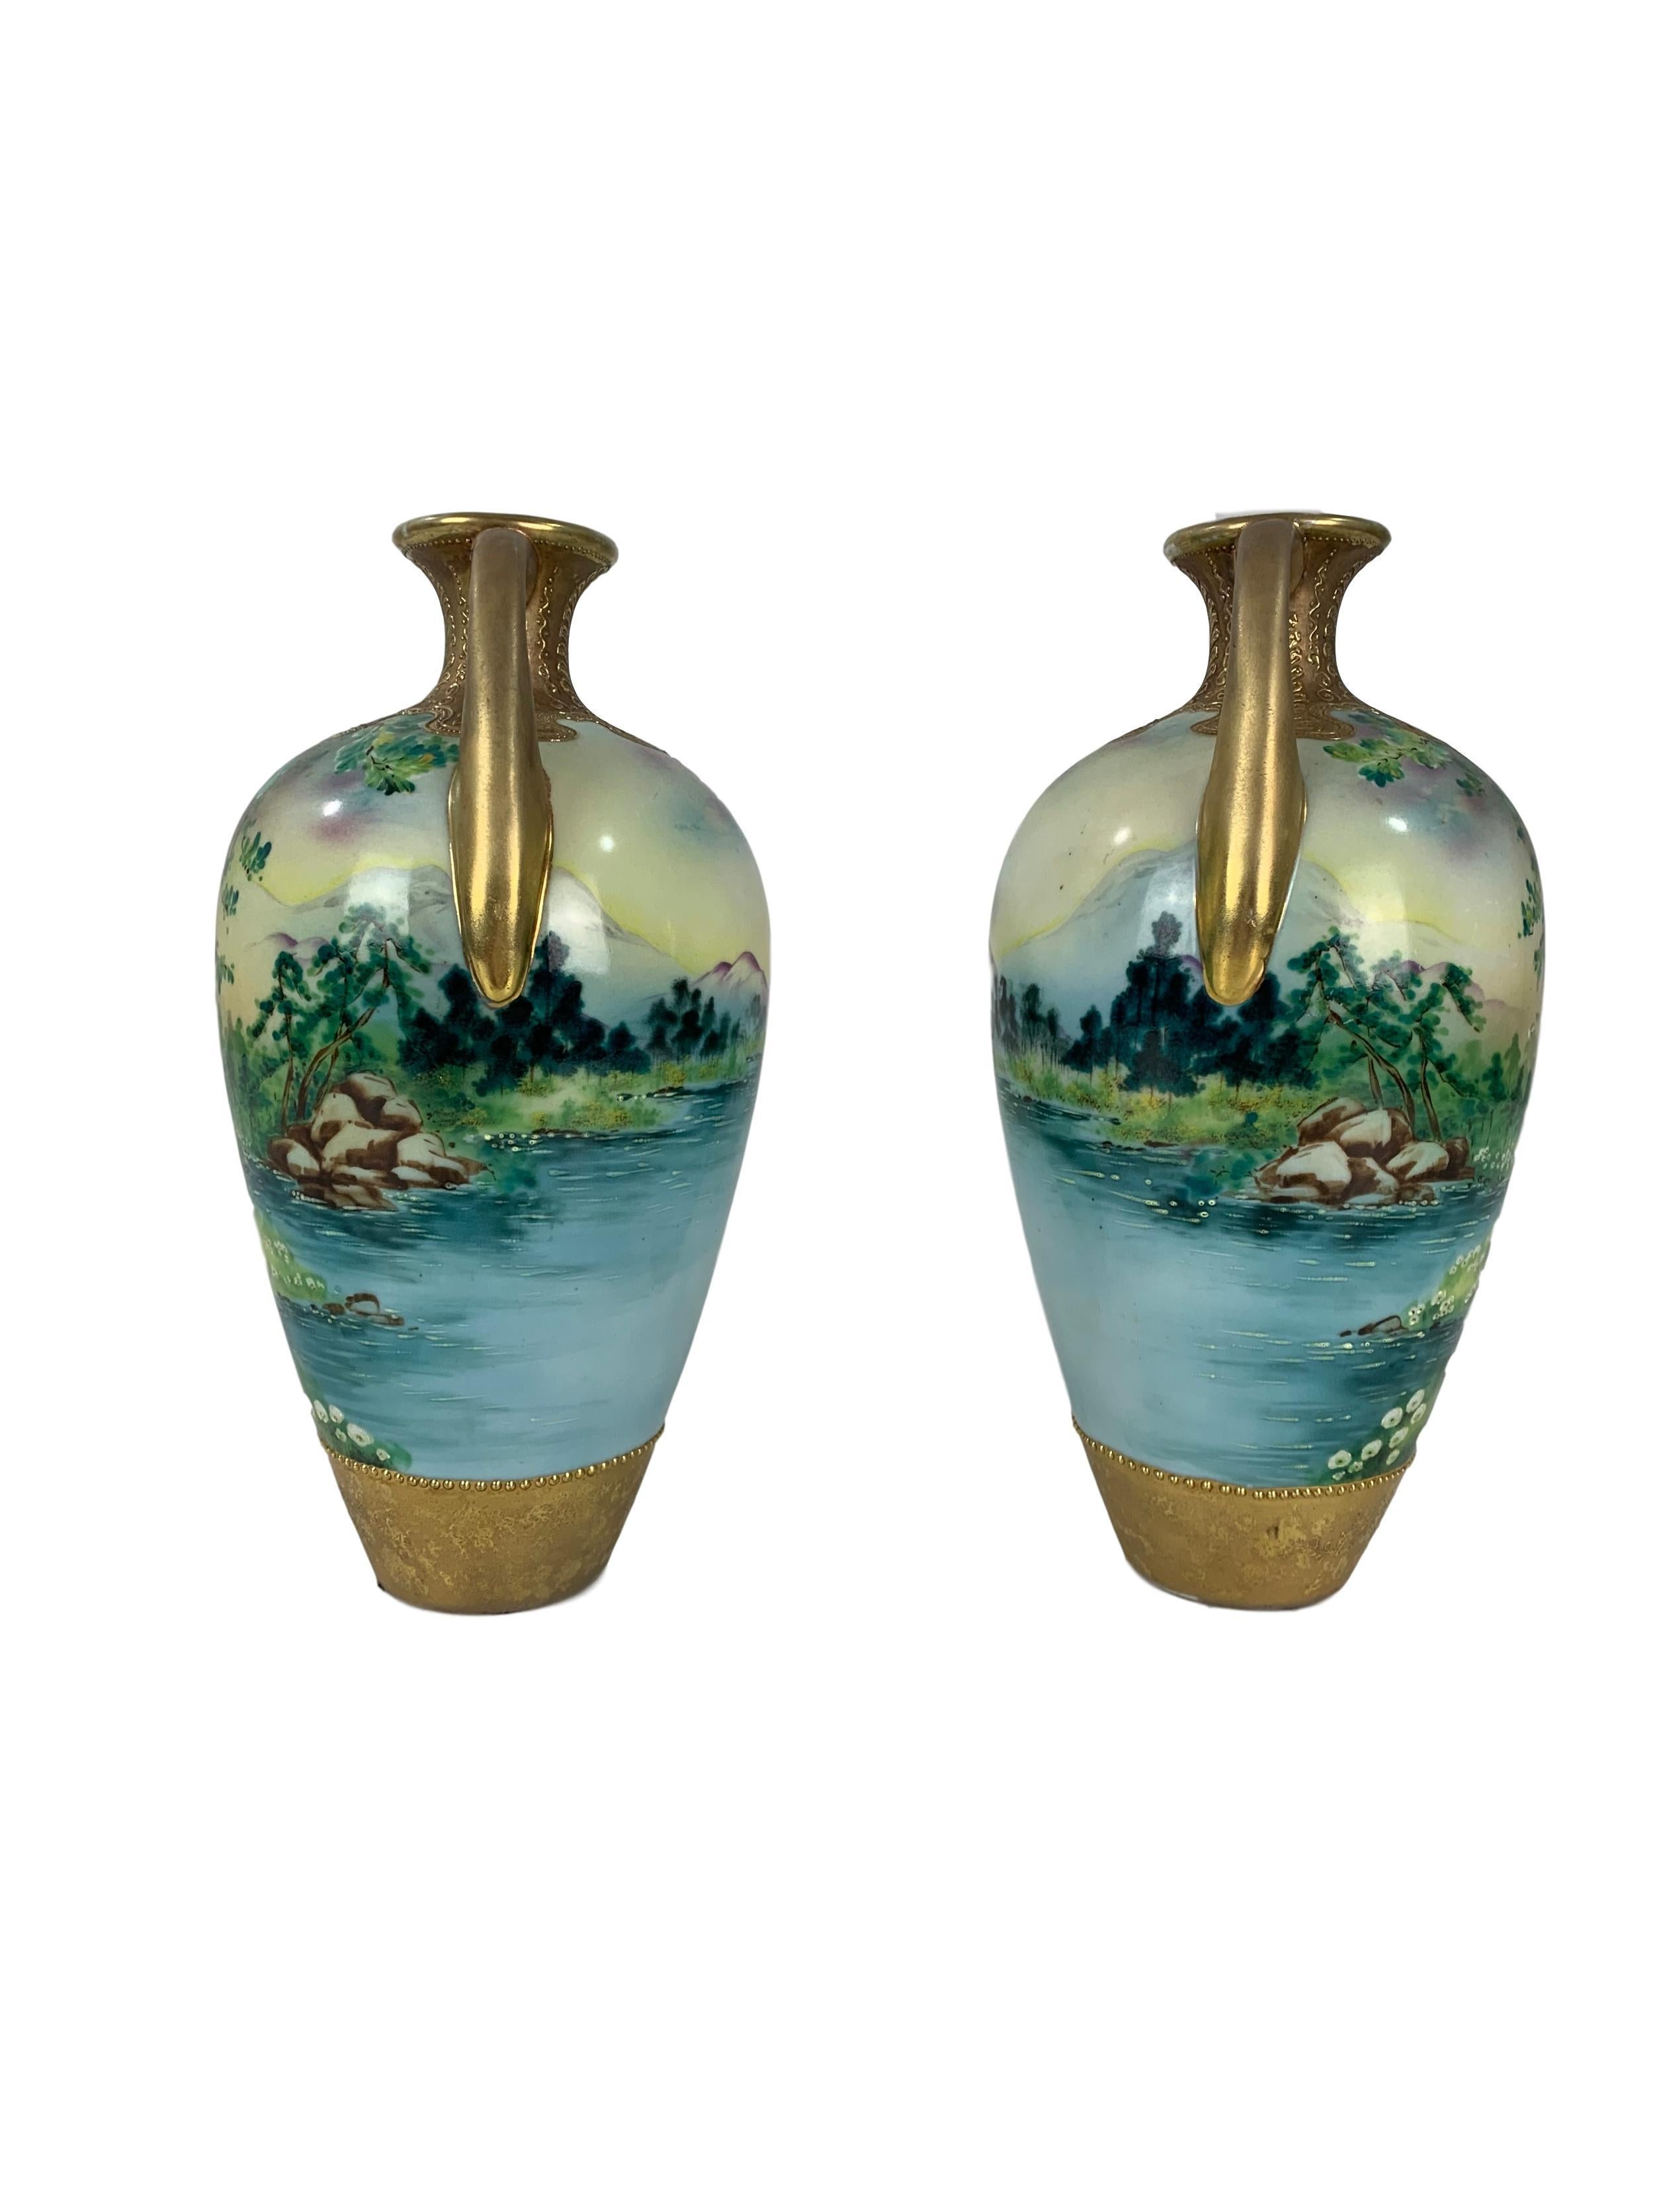 Pair of hand painted Antique Nippon mirrored vases, made for export to the West, Japan 1890 to 1920. Painted with forest mountain lake scenes.

2